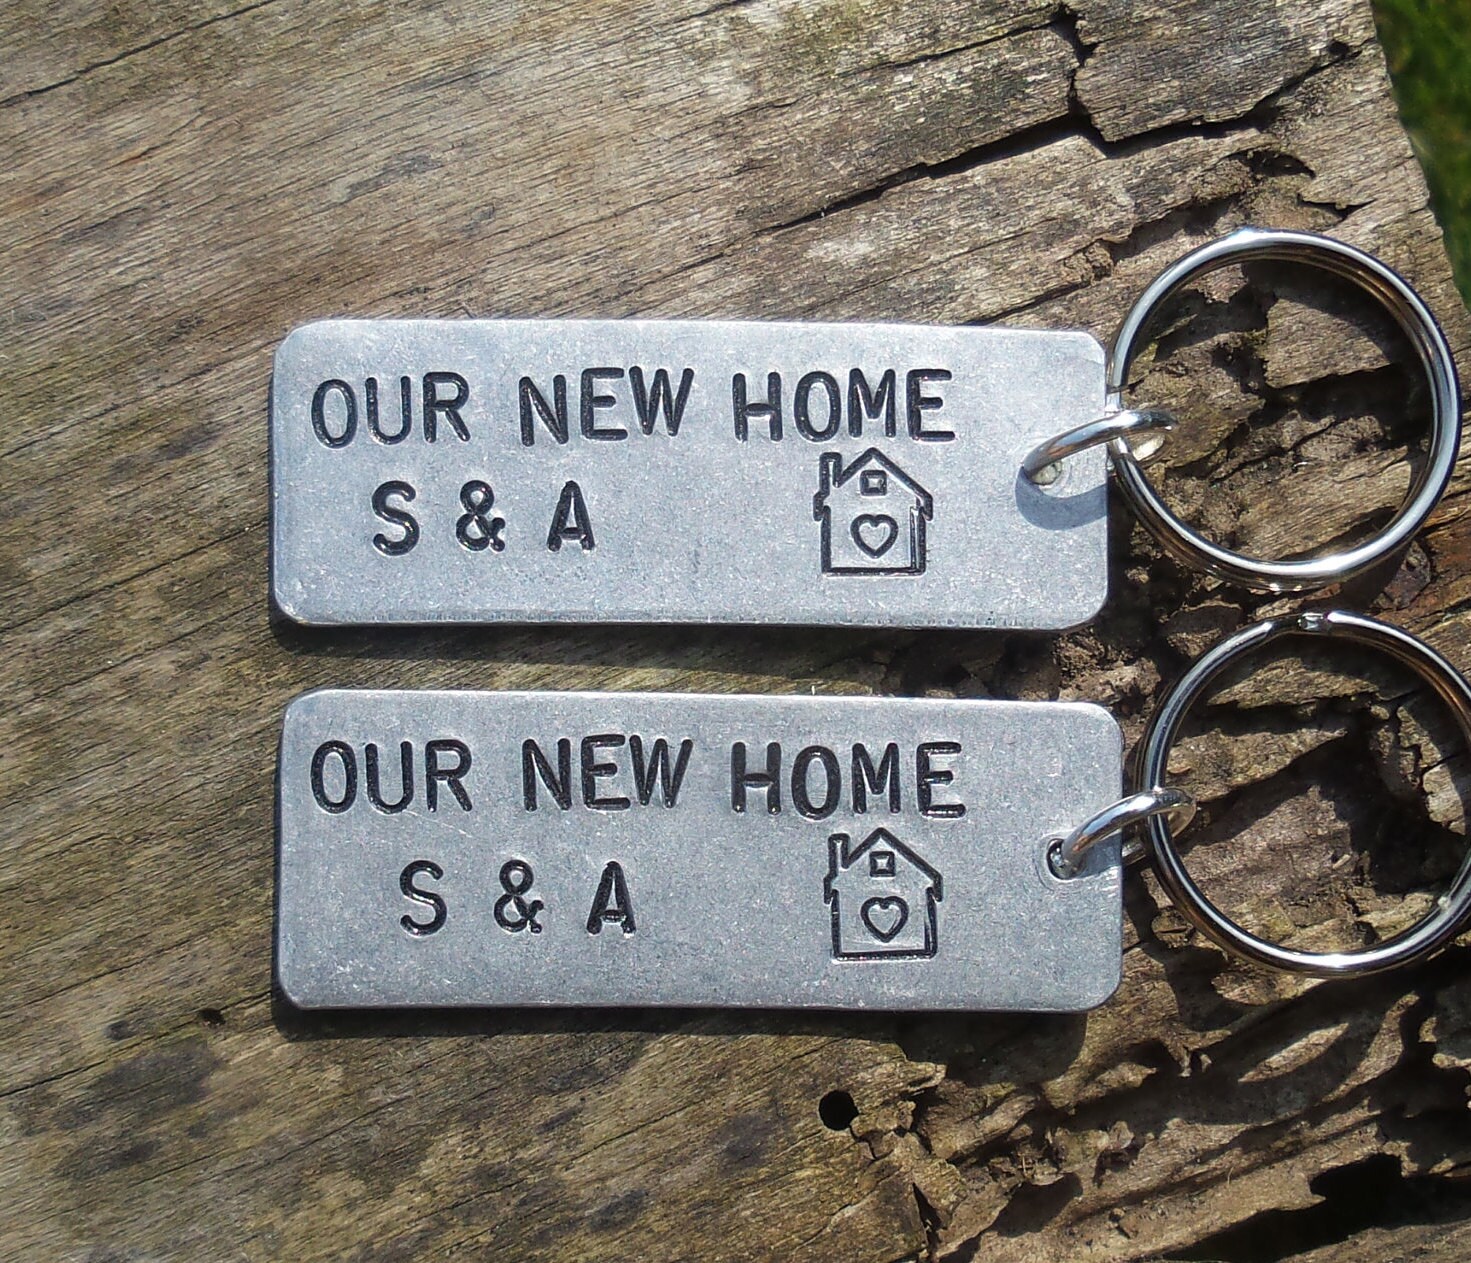 SET OF 2 BLANK KEY RING FOBS TO ENGRAVE MESSAGES Twist Open/Close Present/Gift 